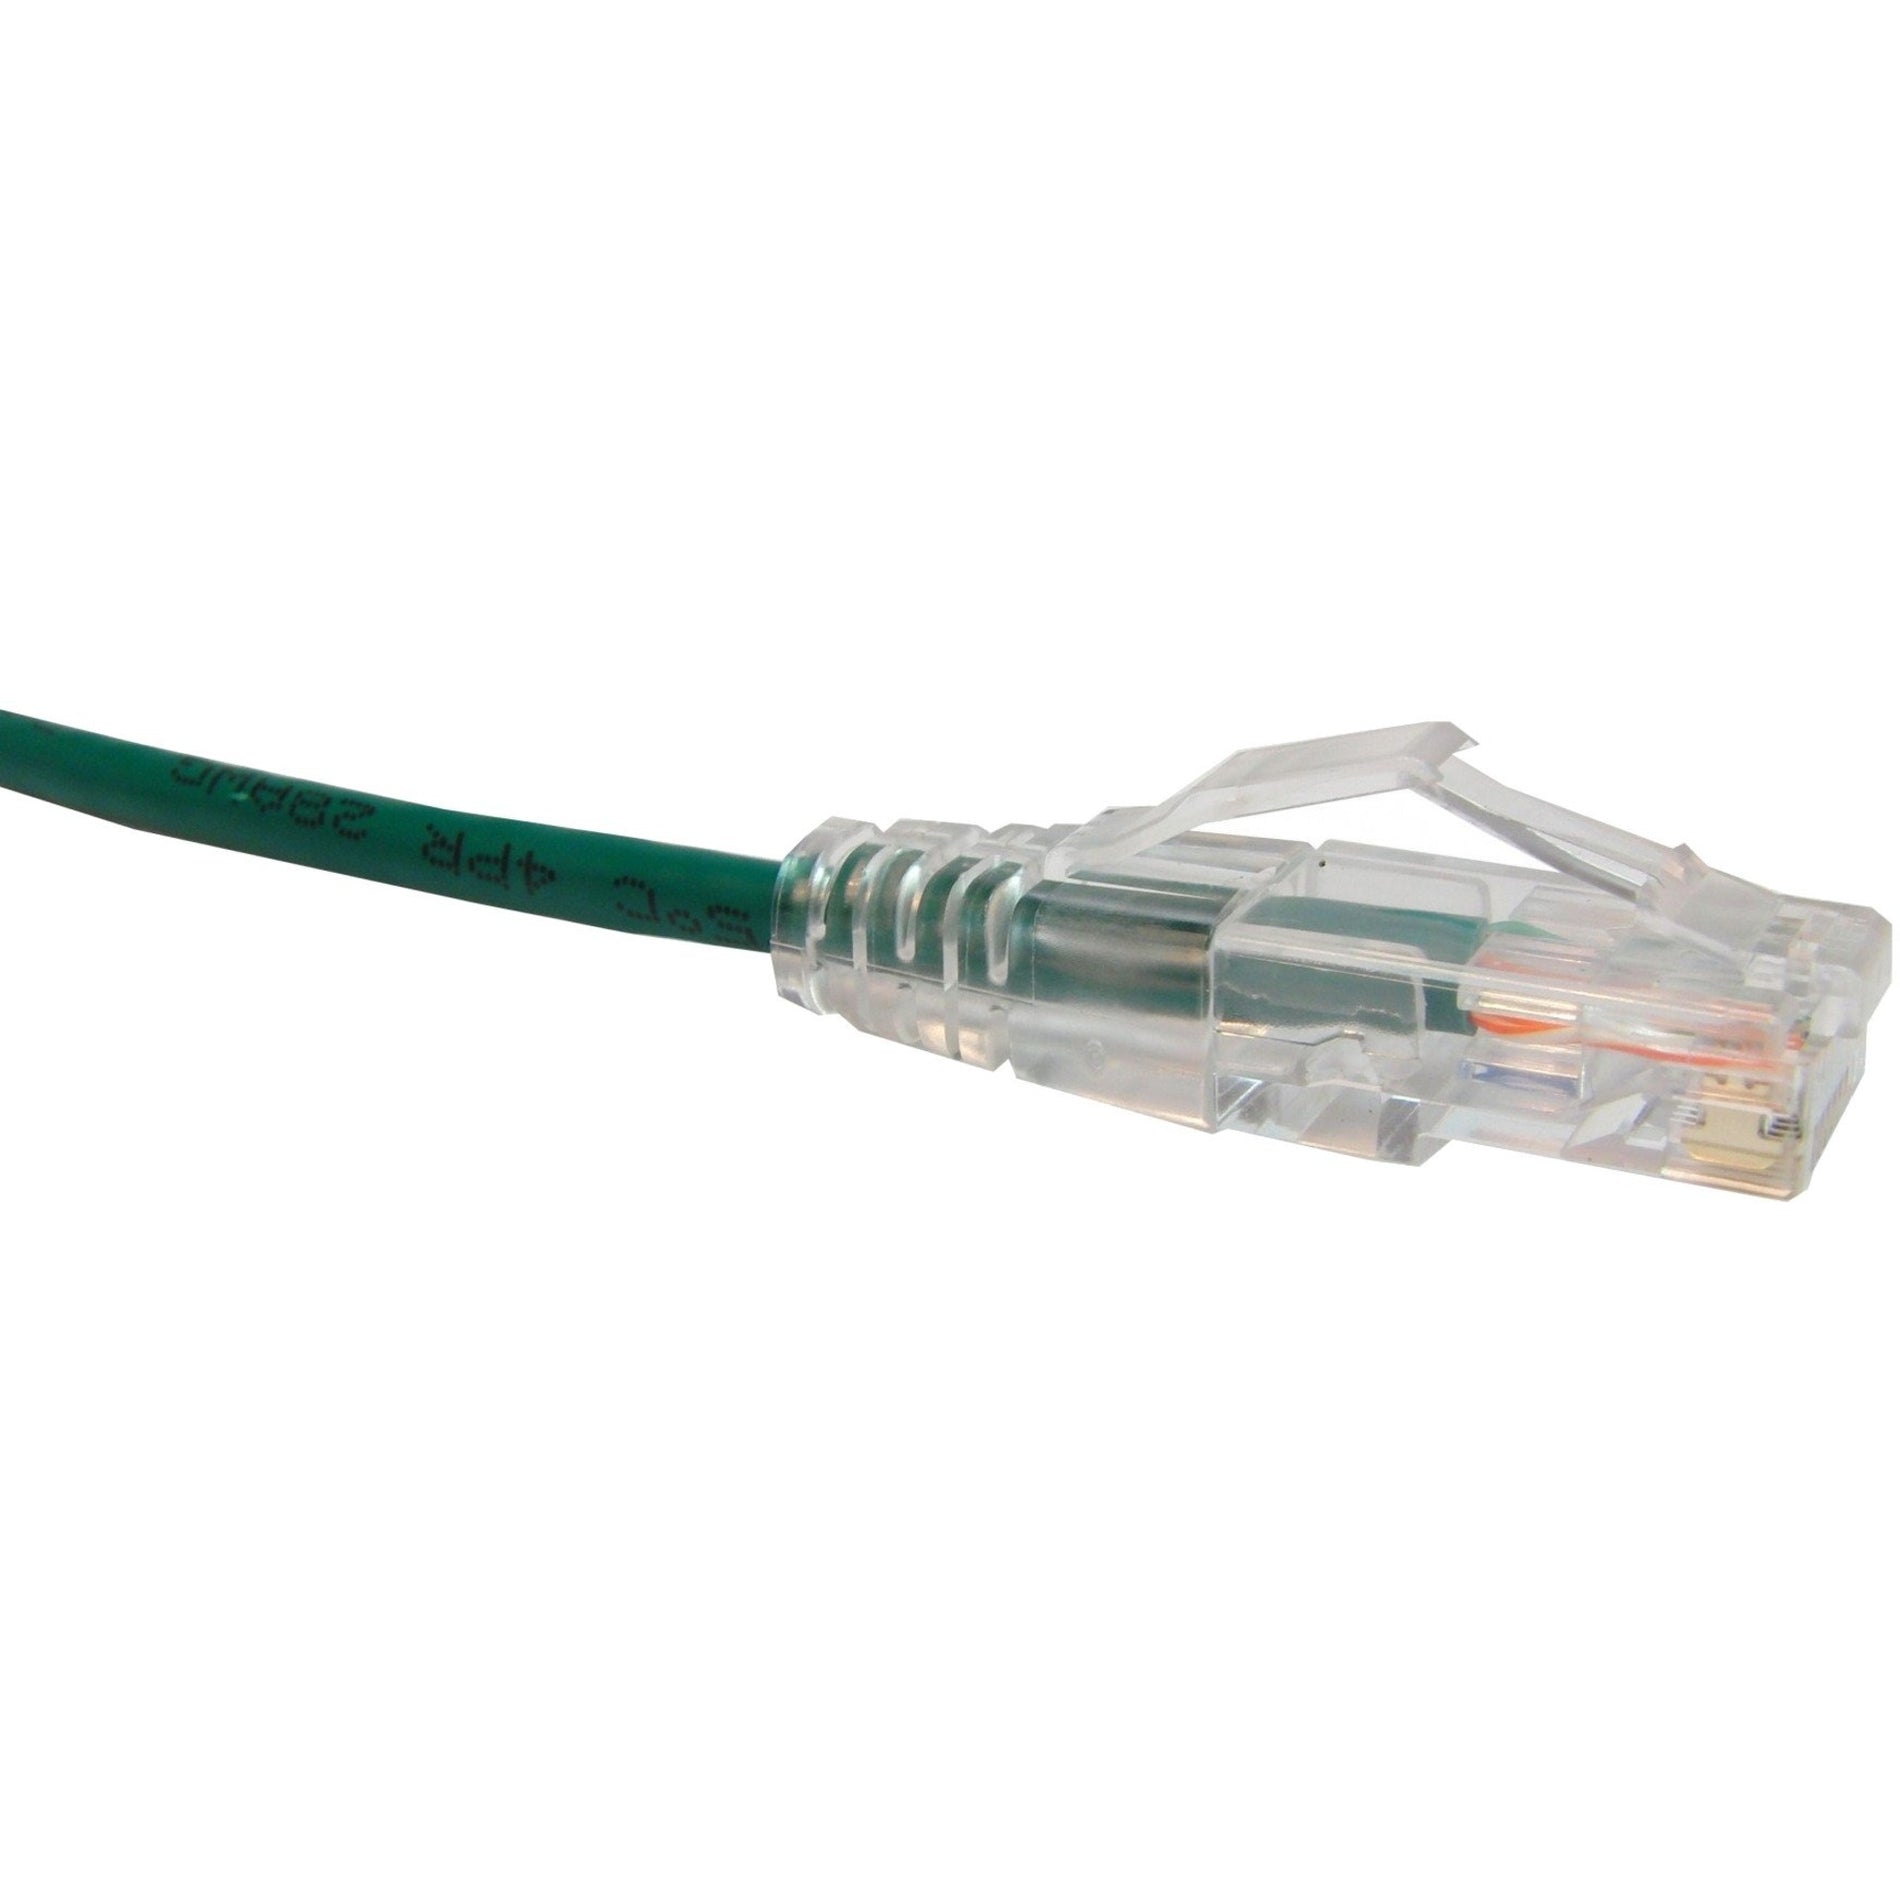 Unirise CS6-01F-GRN Clearfit Slim Cat6 Patch Cable, Green, 1ft